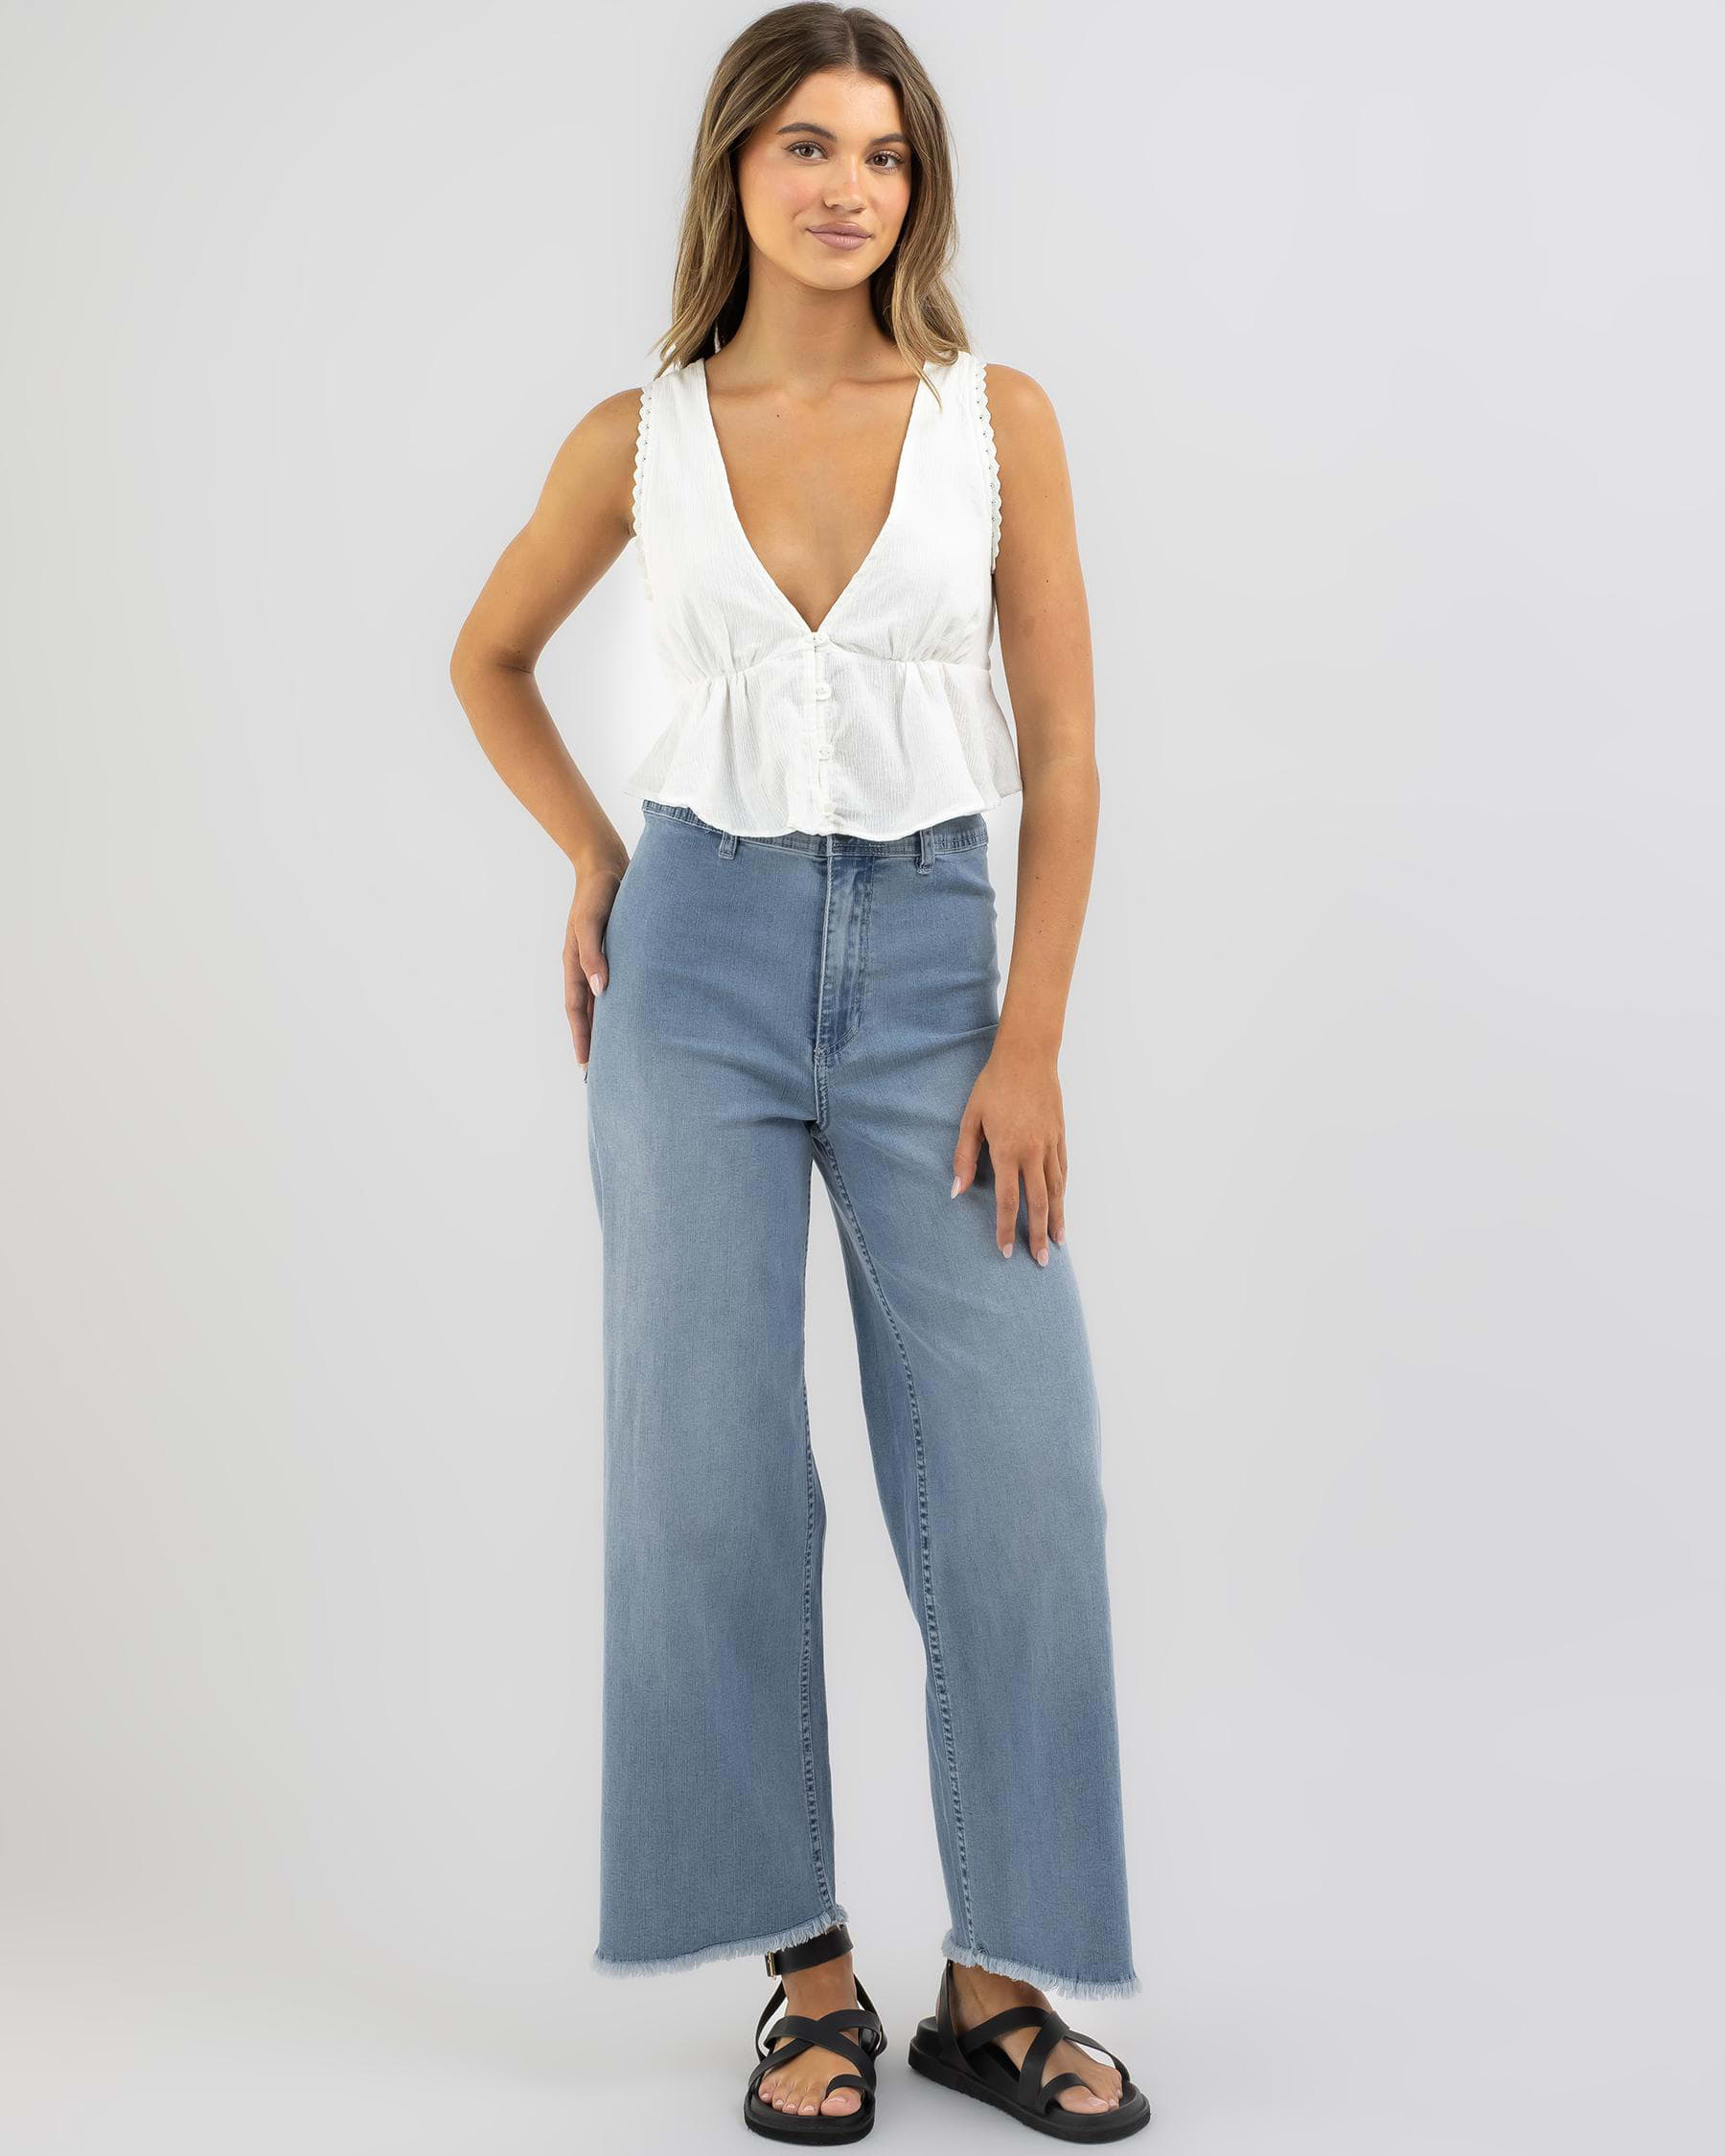 Rusty Coco Crop Top In White - Fast Shipping & Easy Returns - City ...